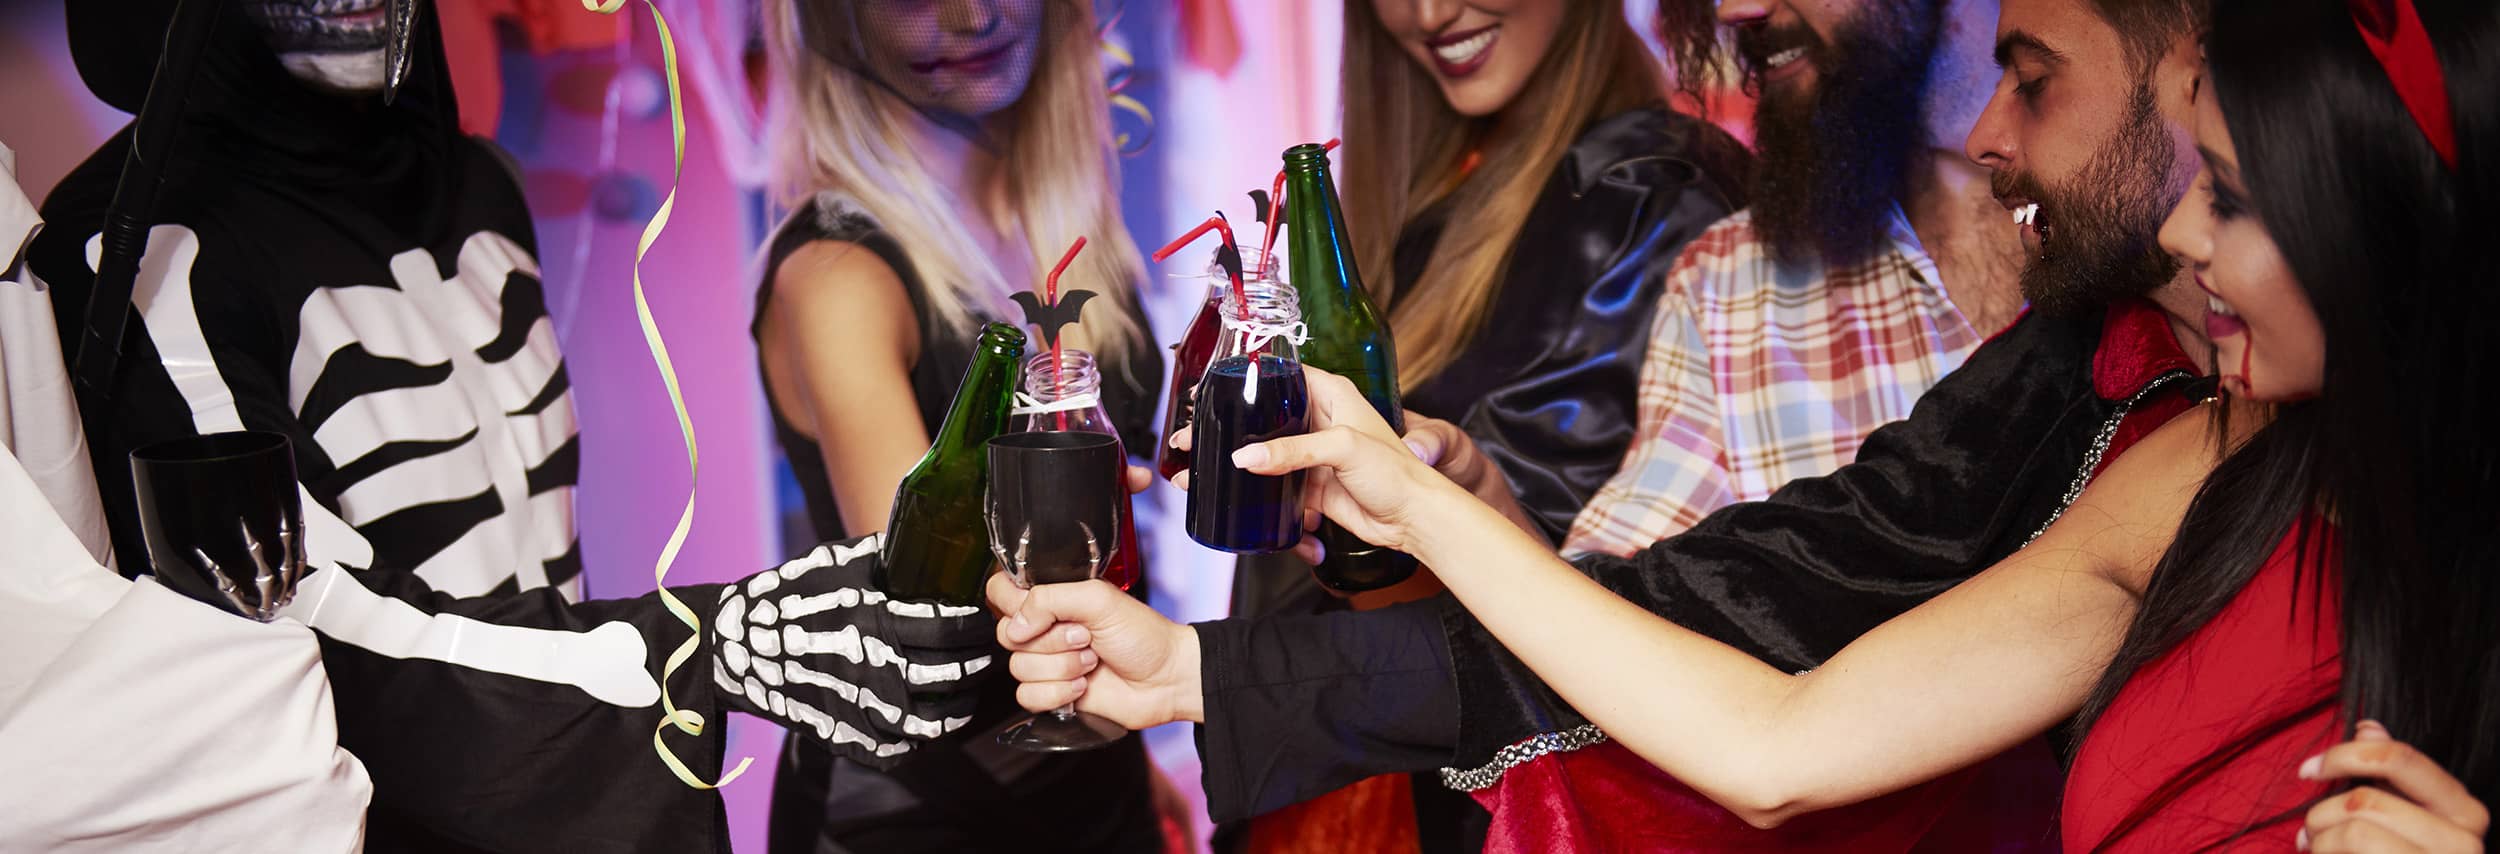 Closeup of several women dressed in Halloween costumes toasting mixed drinks and beers at a Halloween event.